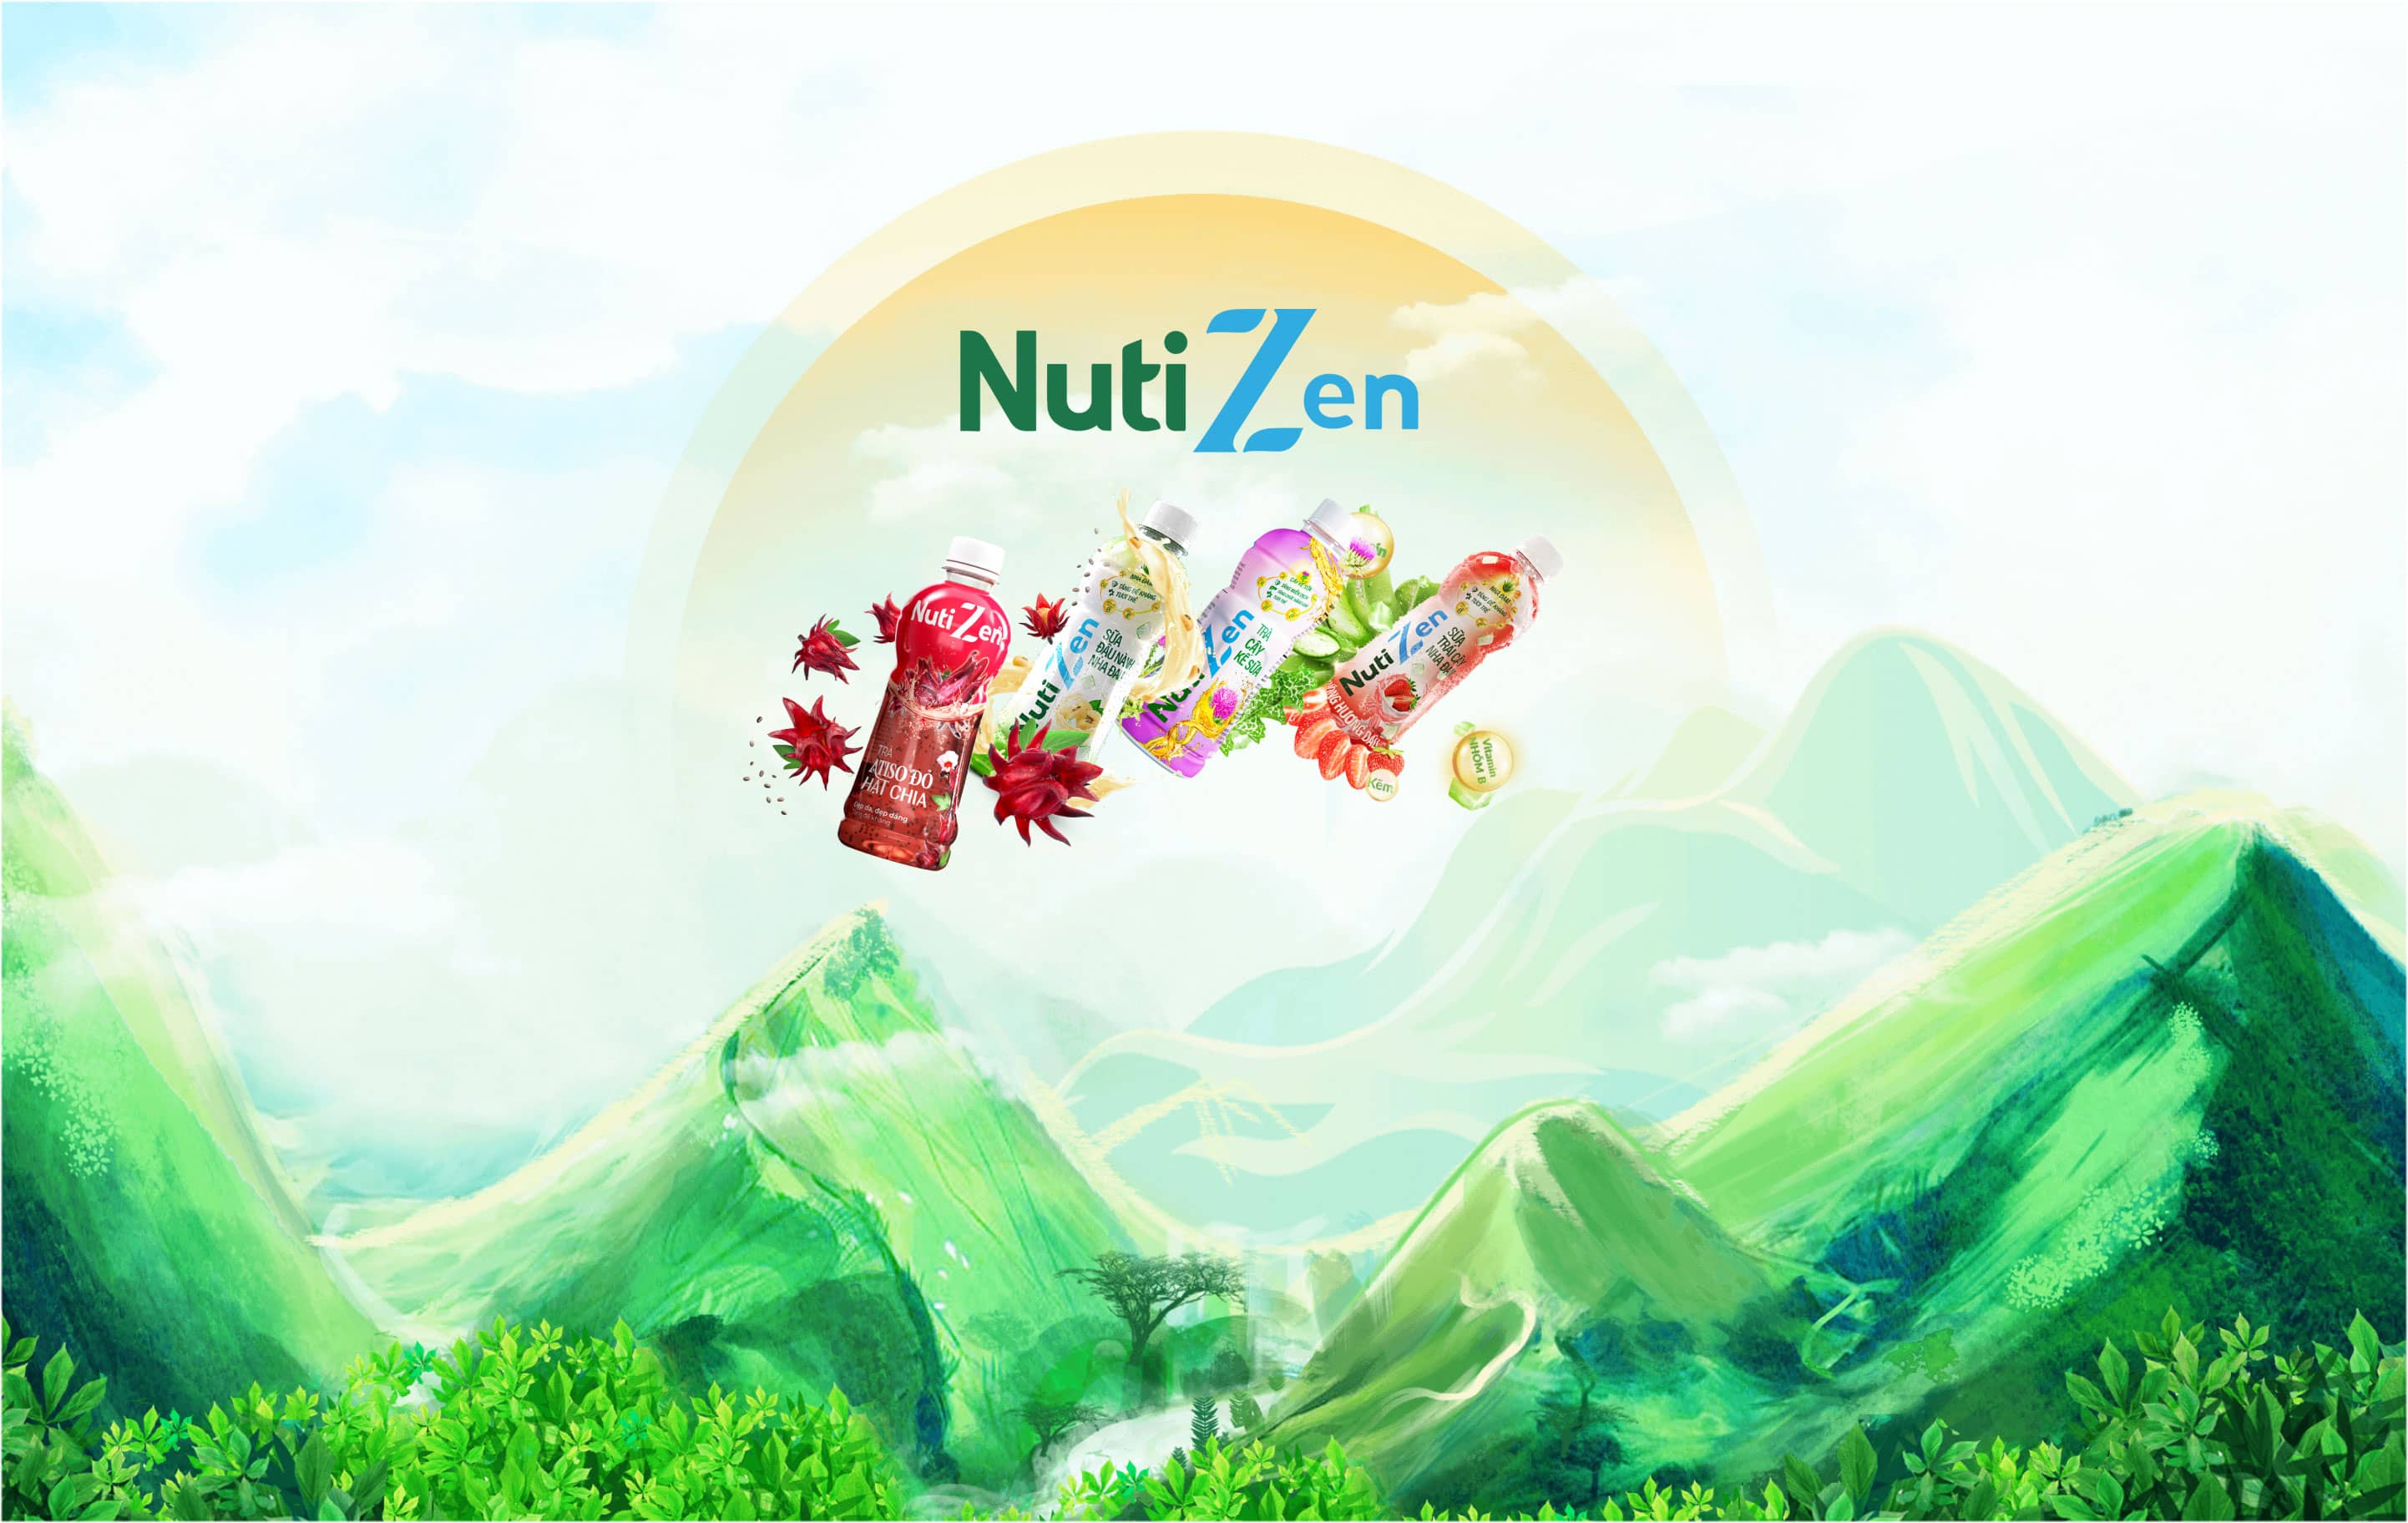 NutiZen - Happy, healthy and natural lifestyle